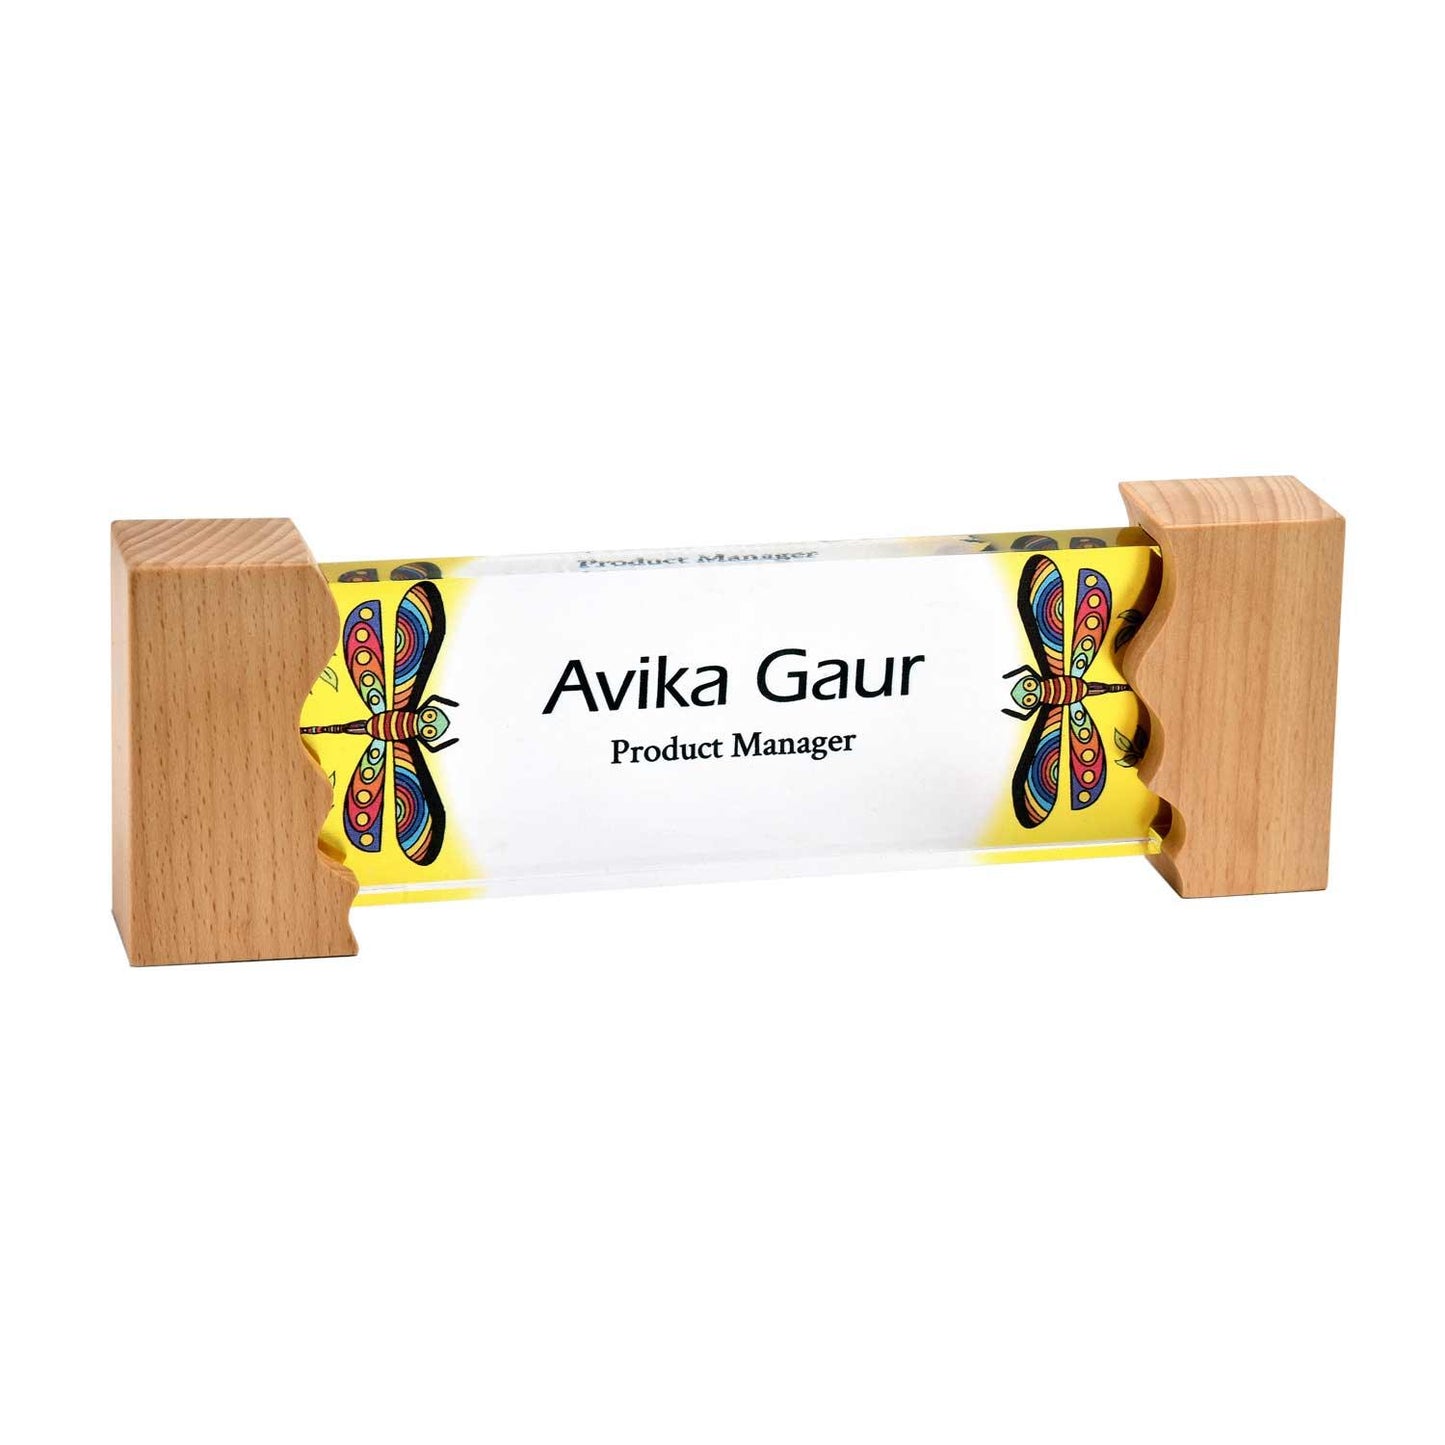 Dragonflight Desk Name Plate with Wooden Stand - Housenama